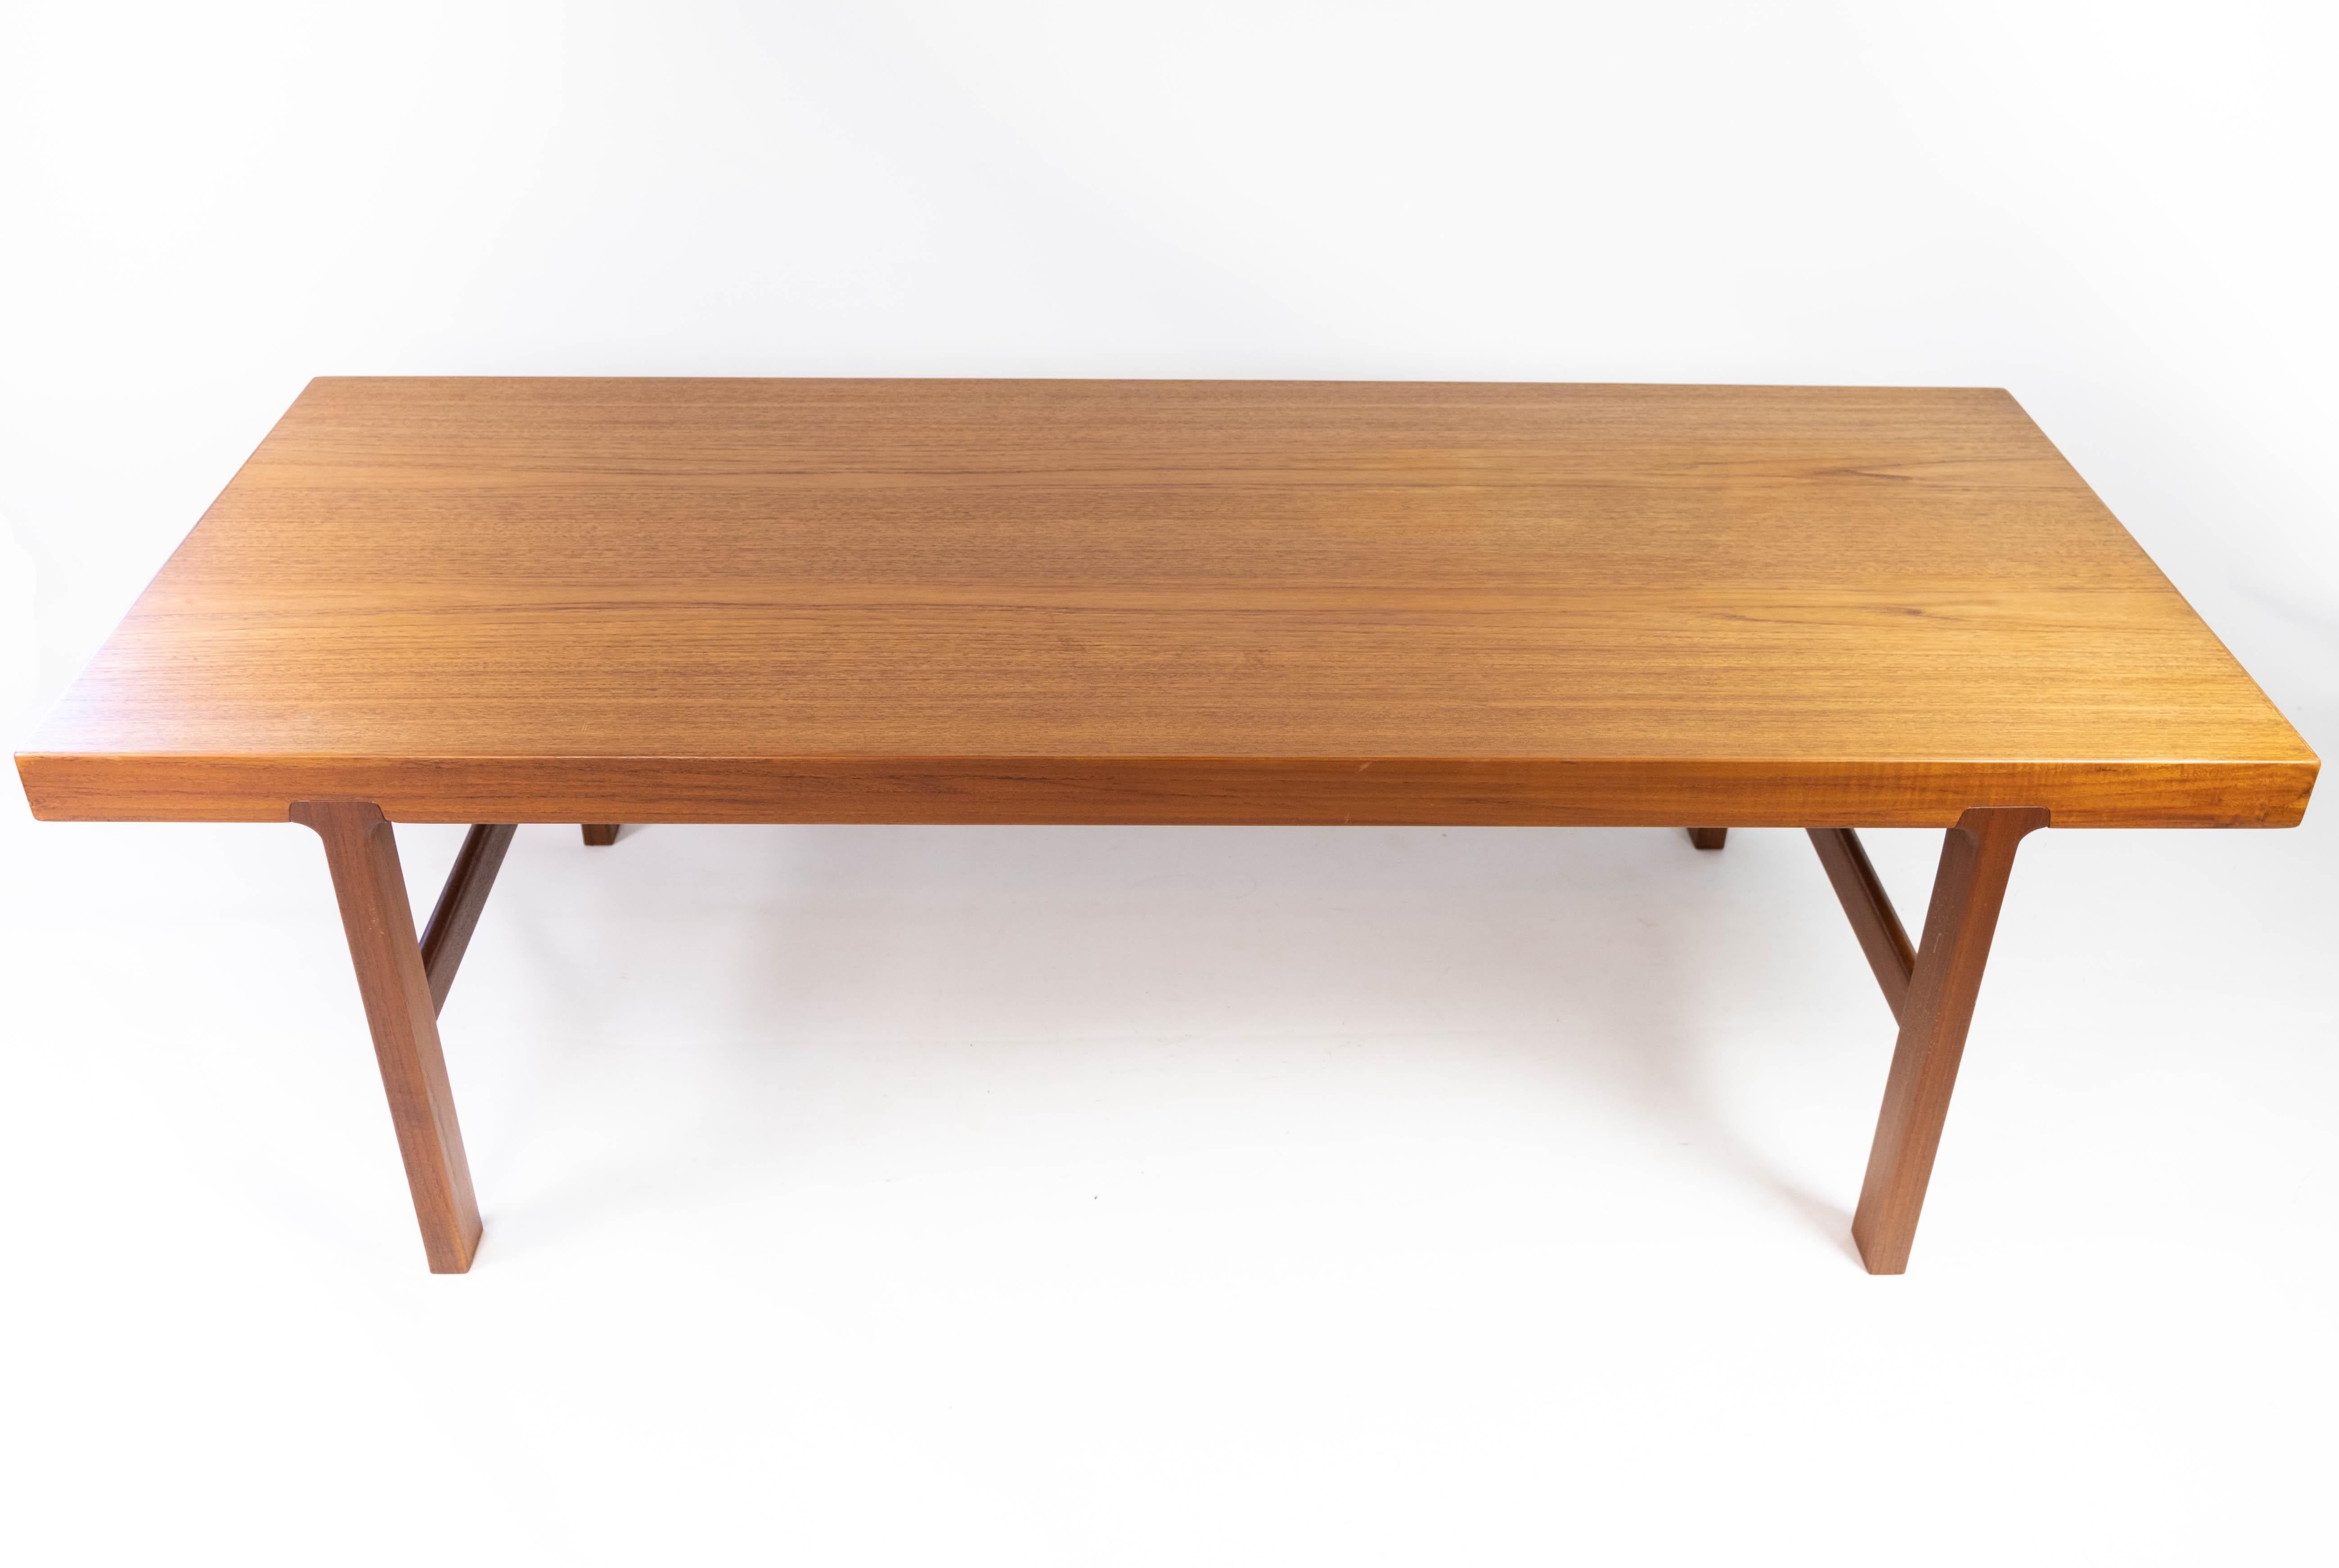 Coffee table in teak with extension plate of Danish design from the 1960s. The table is in great vintage condition.
Extension is 50 x 37 cm.